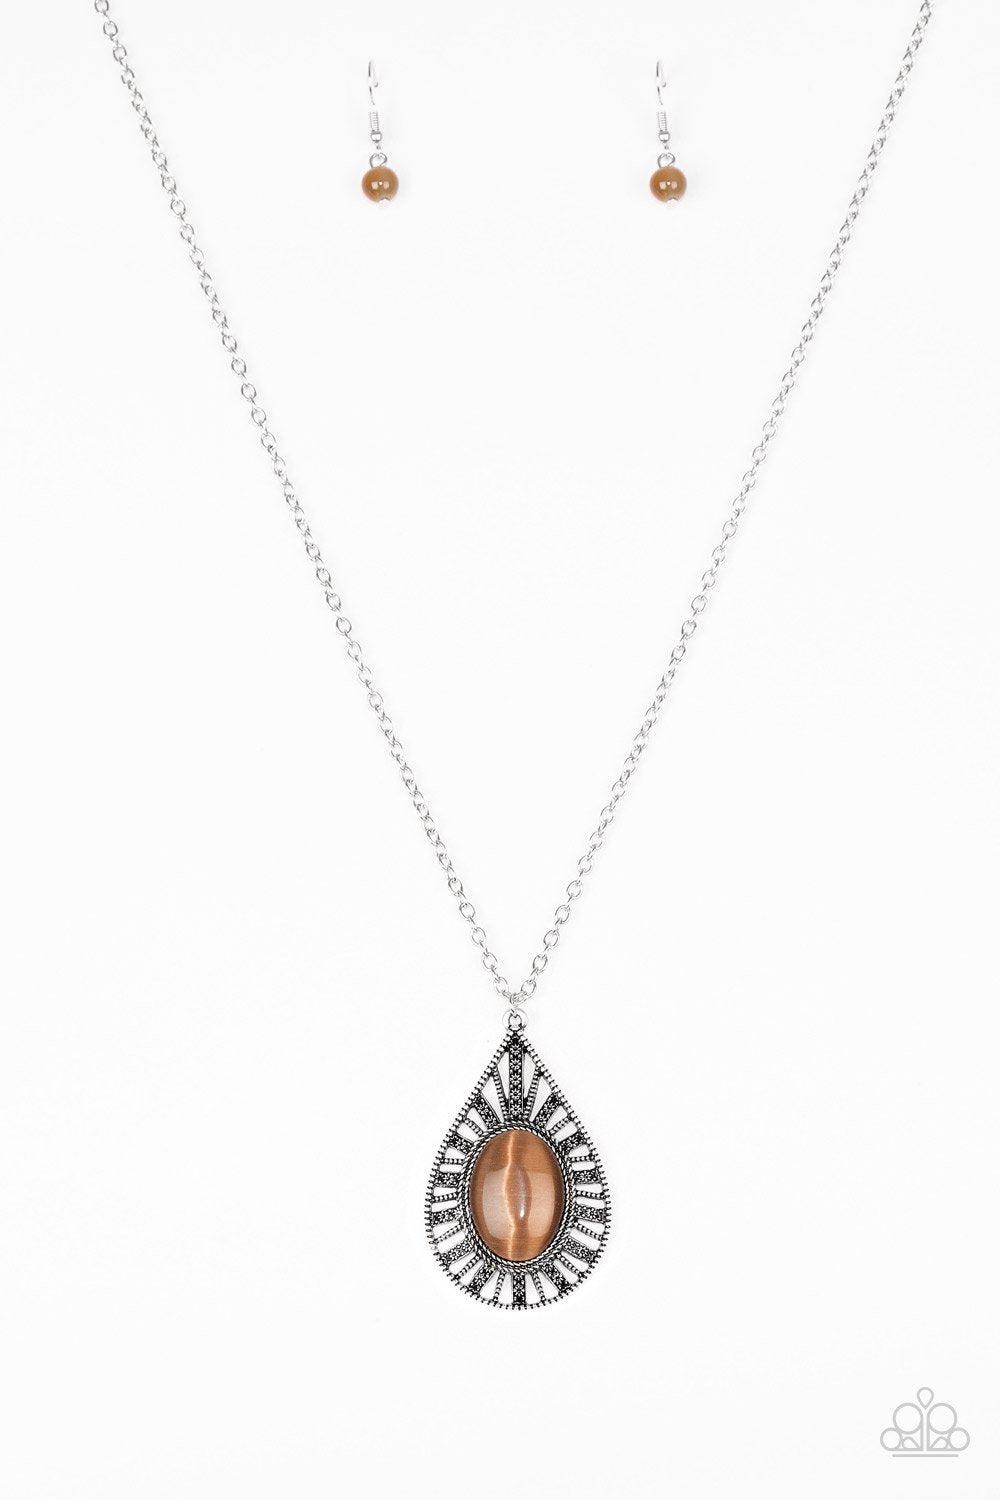 Total Tranquility Brown Moonstone Necklace - Paparazzi Accessories-CarasShop.com - $5 Jewelry by Cara Jewels